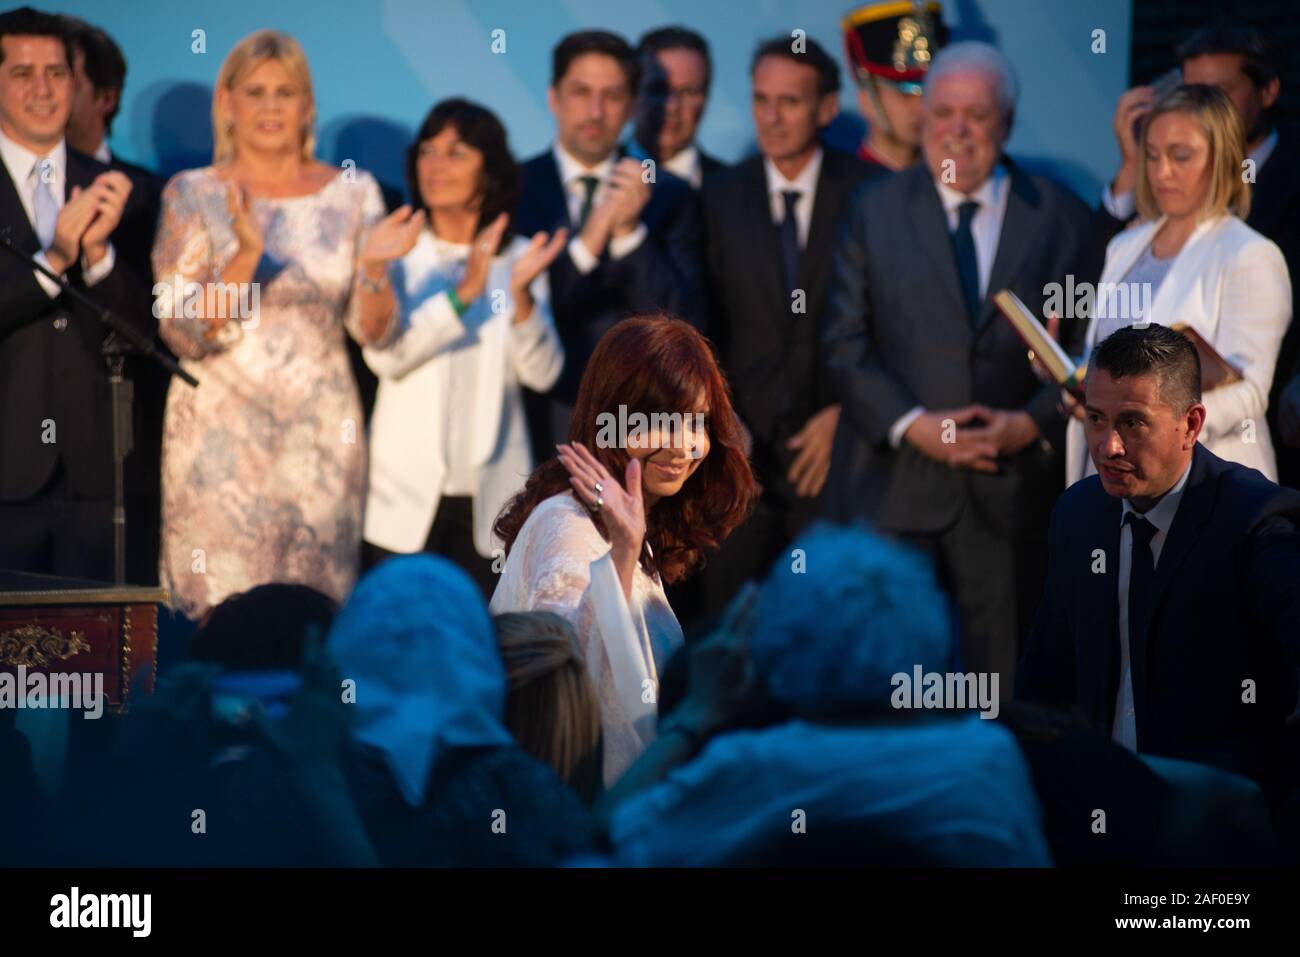 Buenos Aires, Argentina. 11th Dec, 2019. Argentine Vice President Cristina Kirchner at the Presidential Palace in Buenos Aires, Argentina, Tuesday, December 10, 2019. Credit: Mario De Fina/FotoArena/Alamy Live News Stock Photo